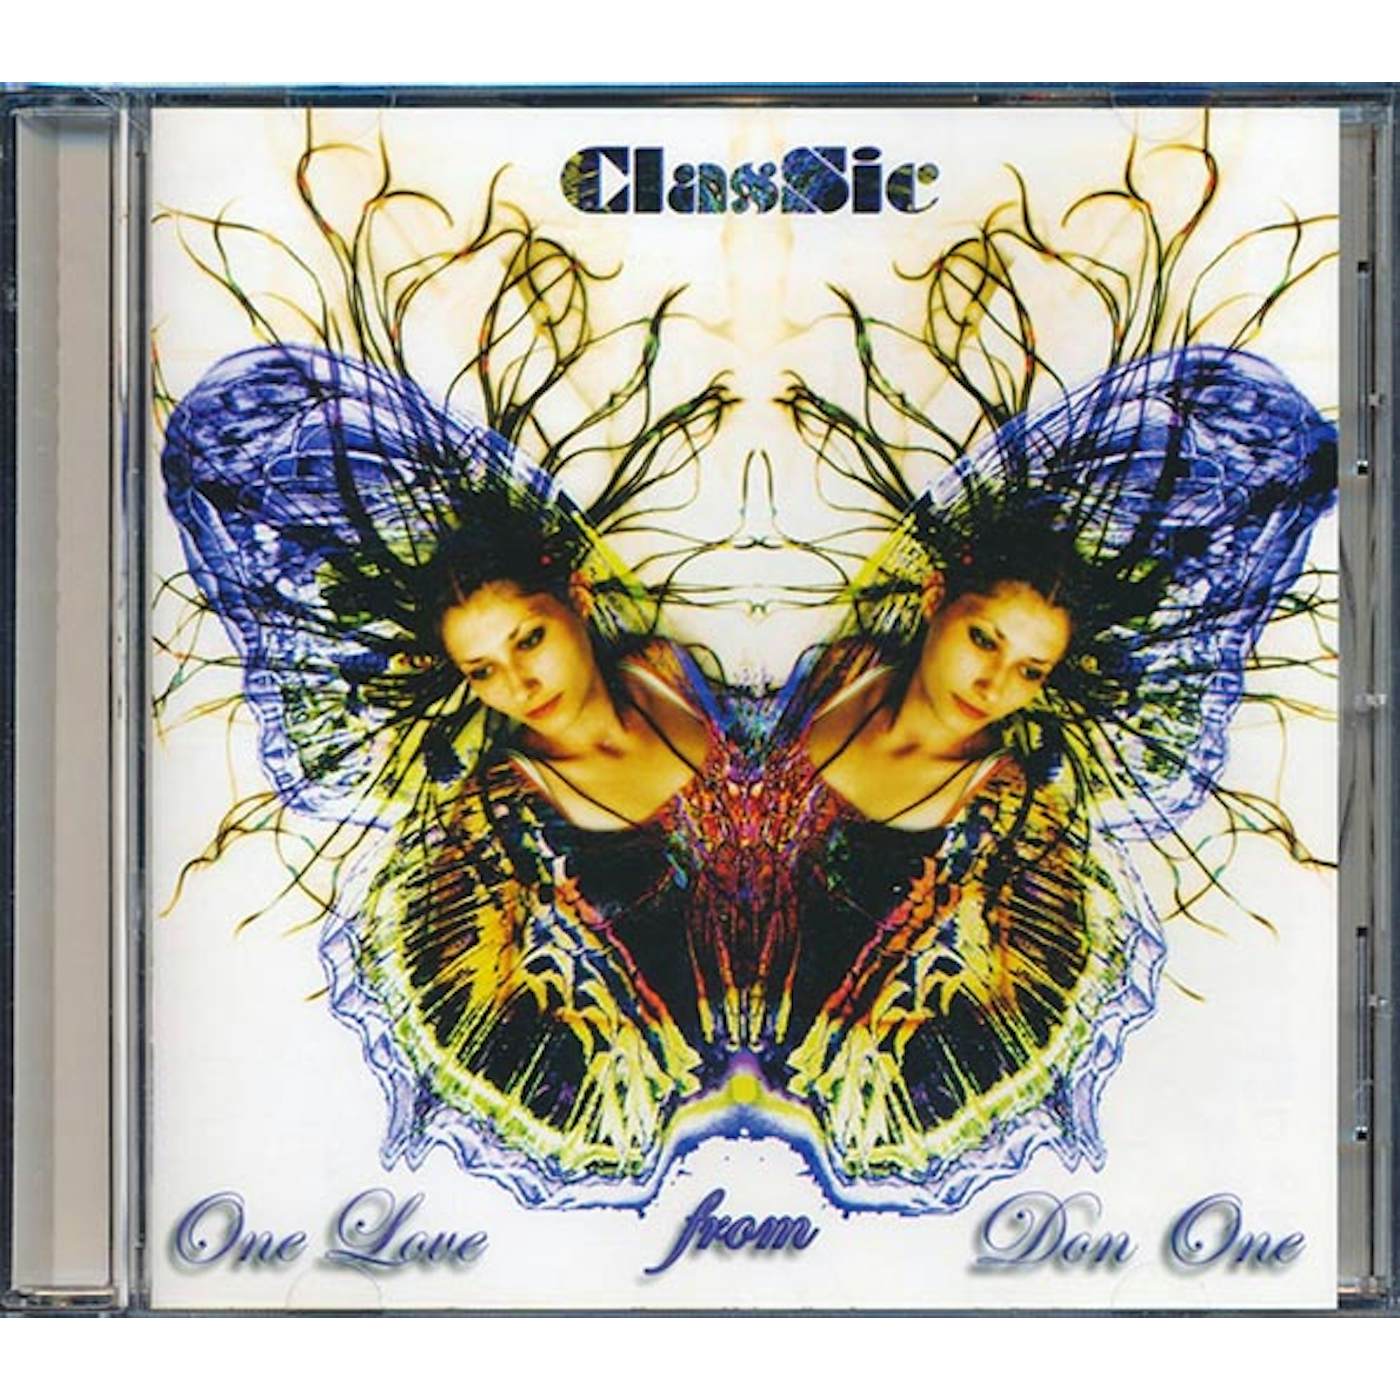 Cornell Campbell, Tony Curtis, Leroy Sibbles, JD Smoothe, Etc.  CD -  Classic: One Love From Don One